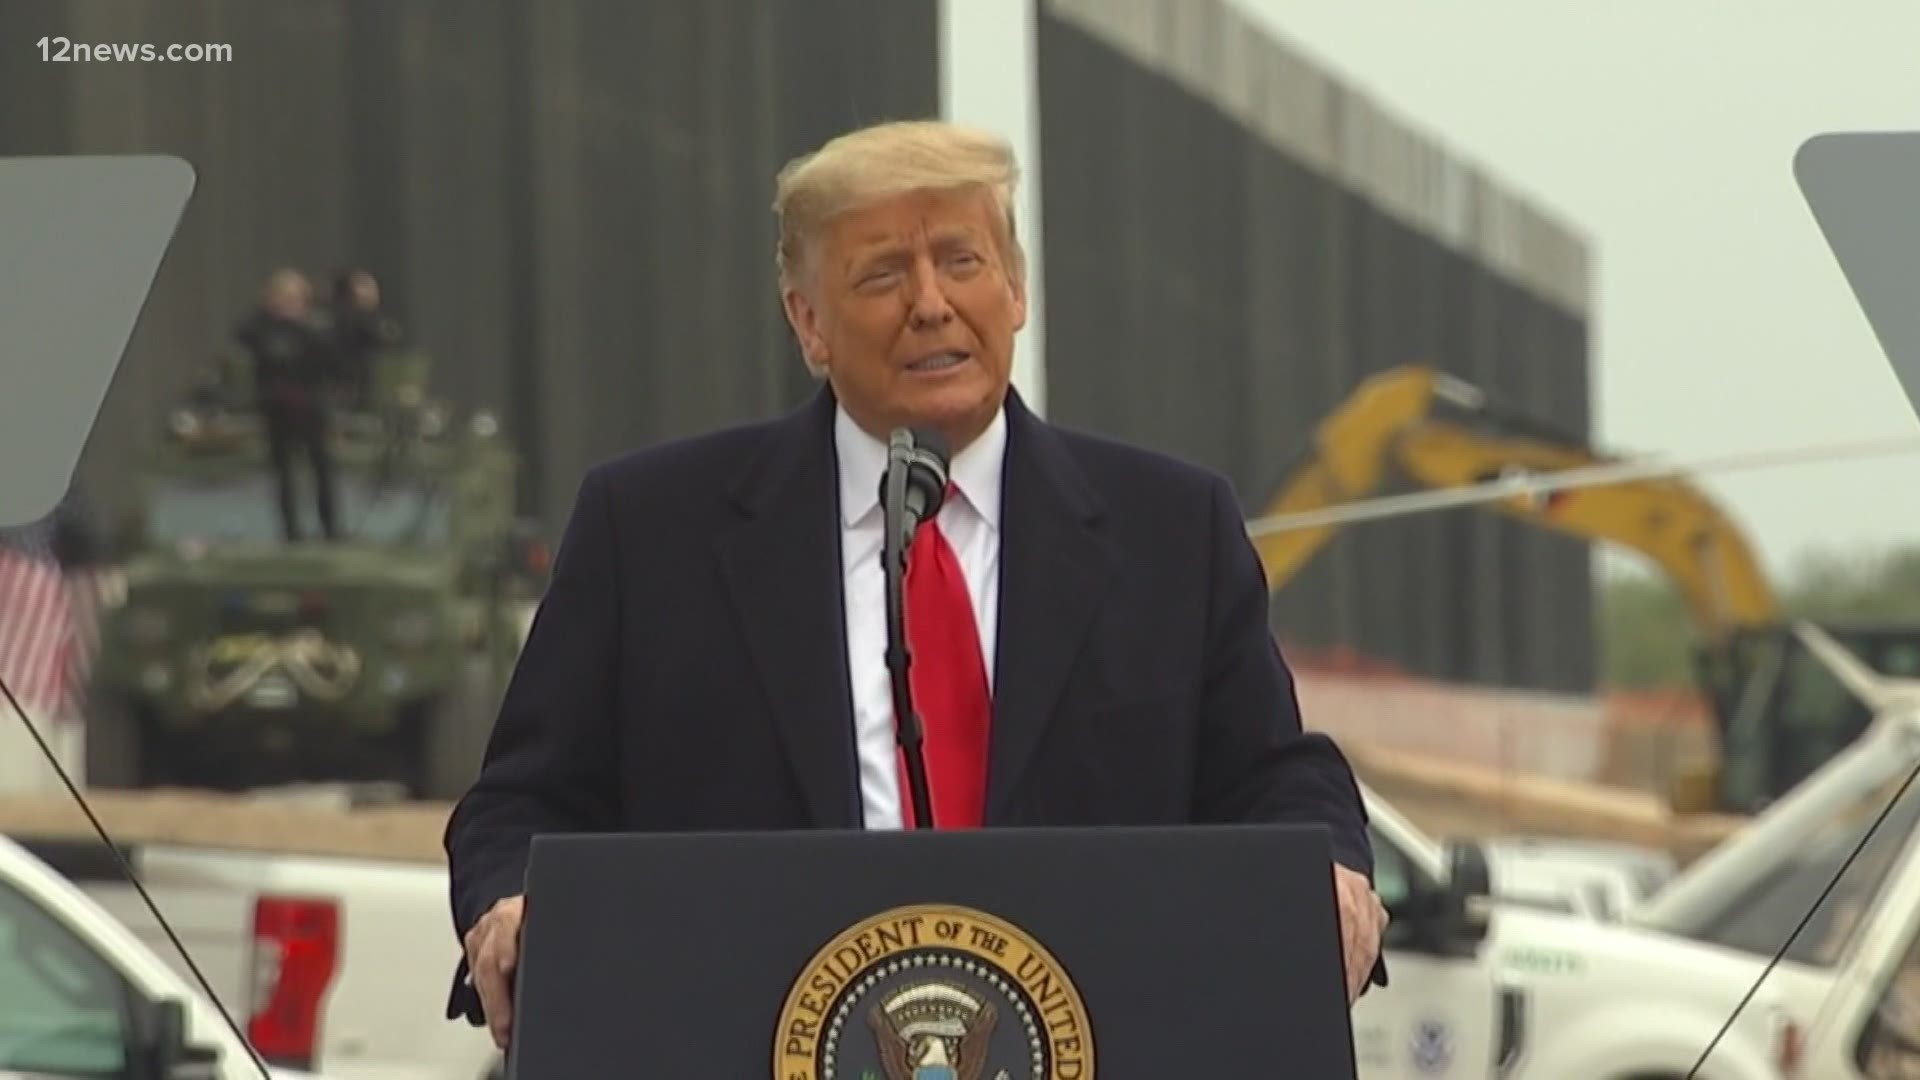 President Trump traveled to Texas on Tuesday to tout the construction of the border wall. Team 12's Adriana Loya looks at what happens next to the wall.